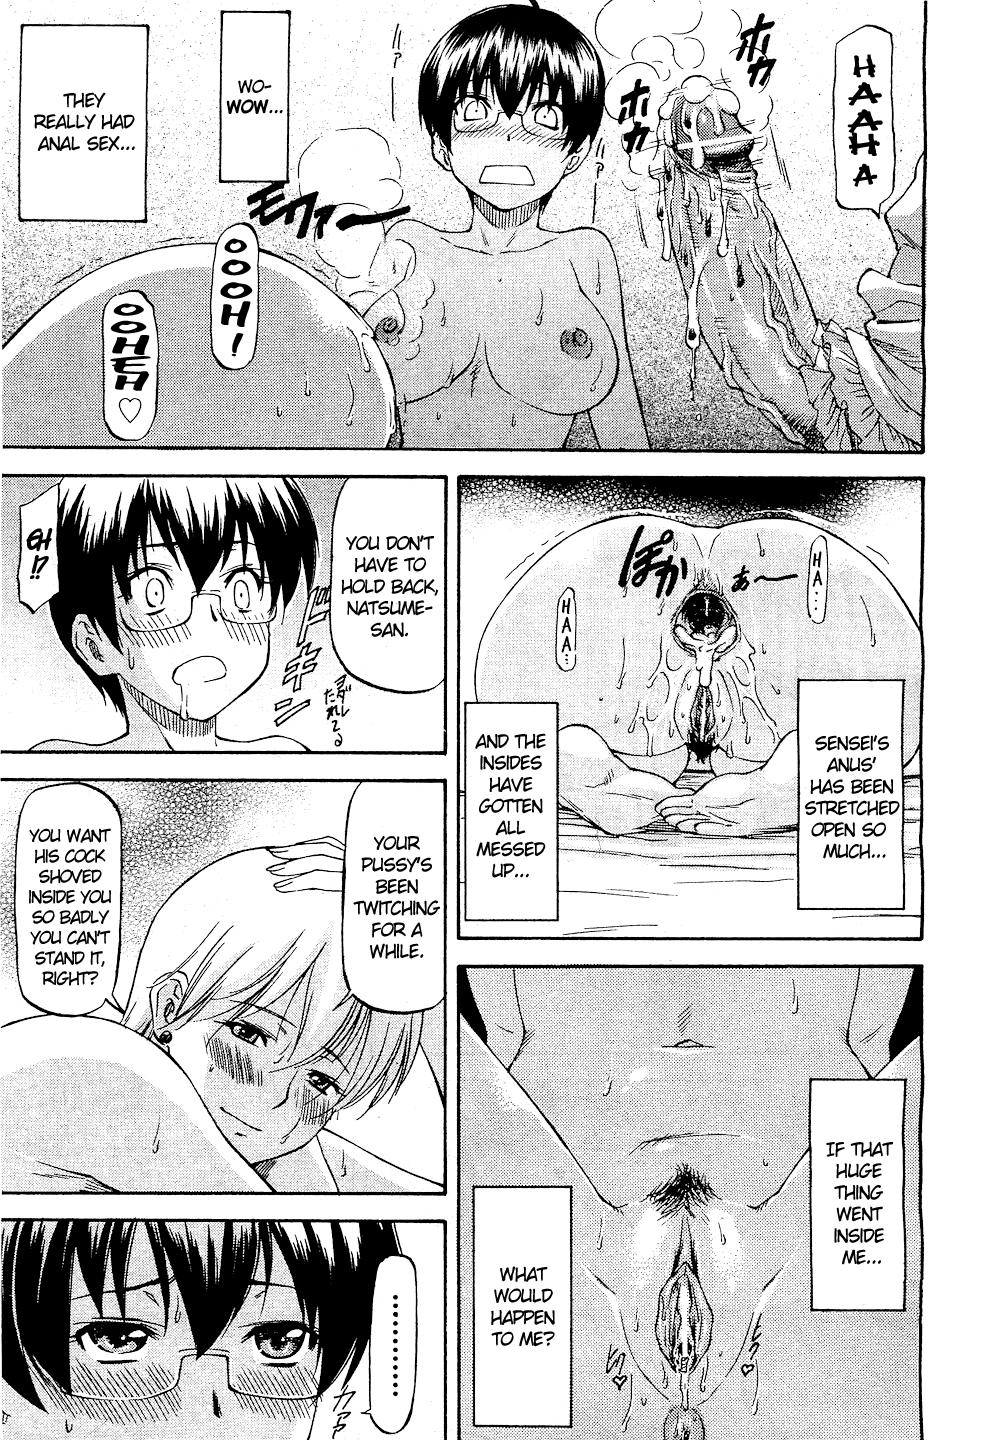 [Nagare Ippon] Meat Hole Ch.02-04,07-09 [English] 65